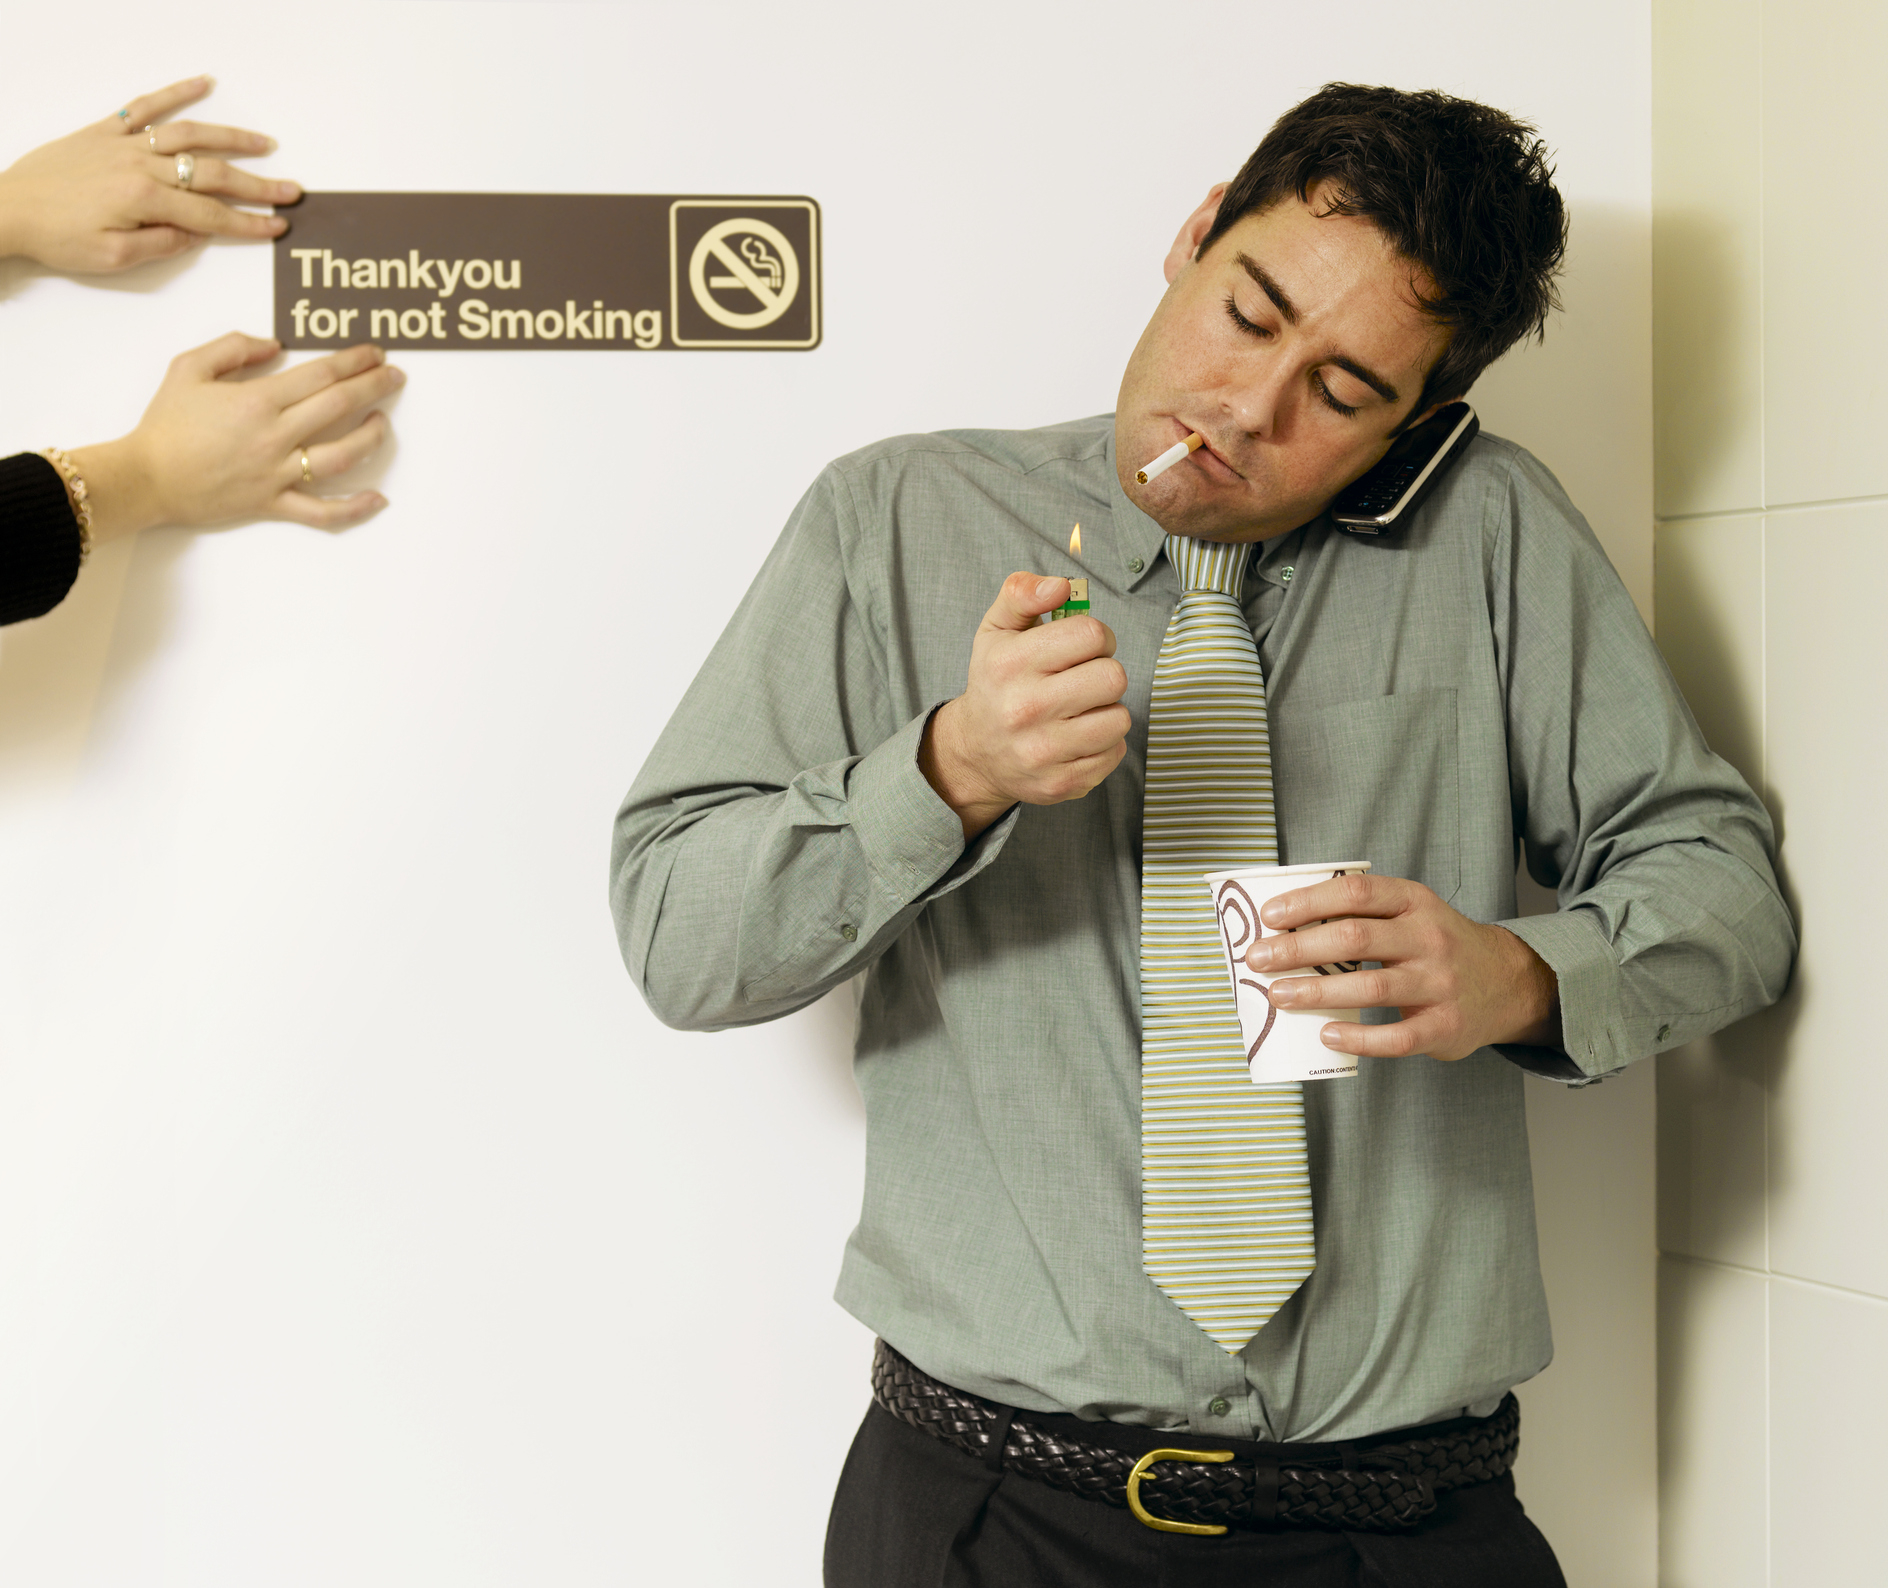 person lighting a cigarette by a no smoking sign